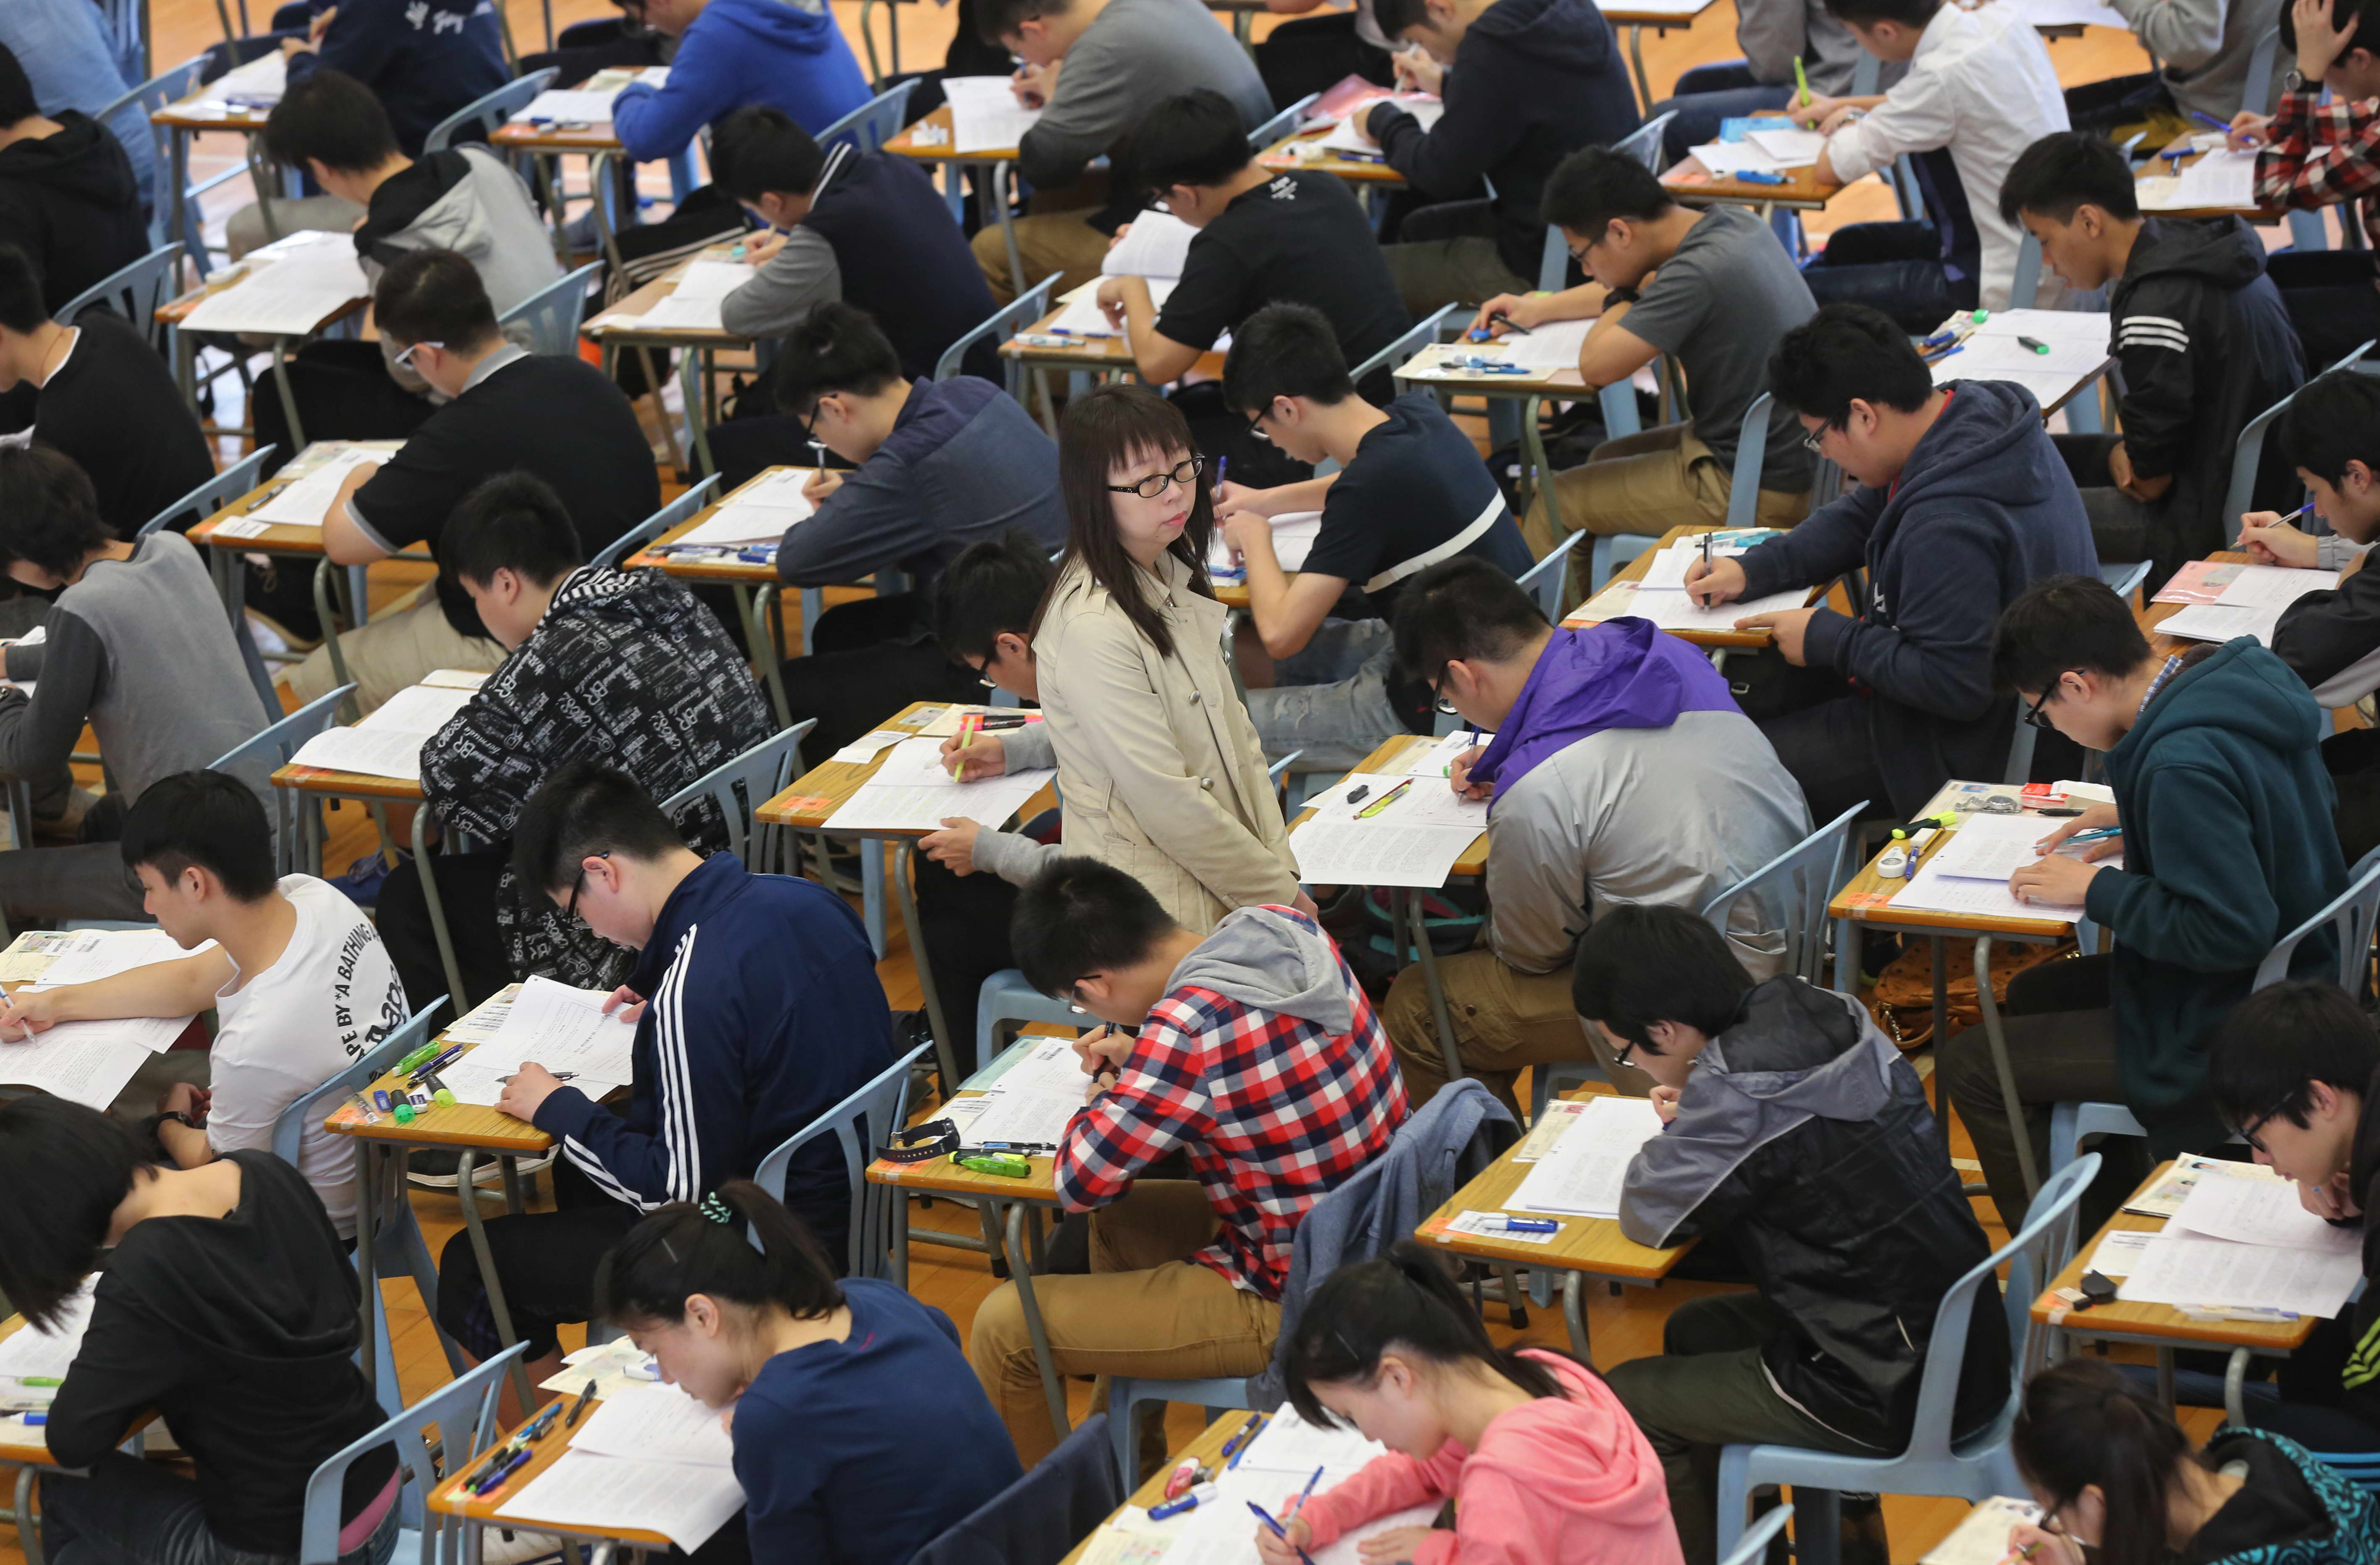 Students sit in for the Hong Kong Diploma of Secondary Education (HKDSE) Examination at the KowloonTechnical School Monday, March 30th, 2015, in Sham Shui Po. SCMP Pictures (POOL). 30MAR15